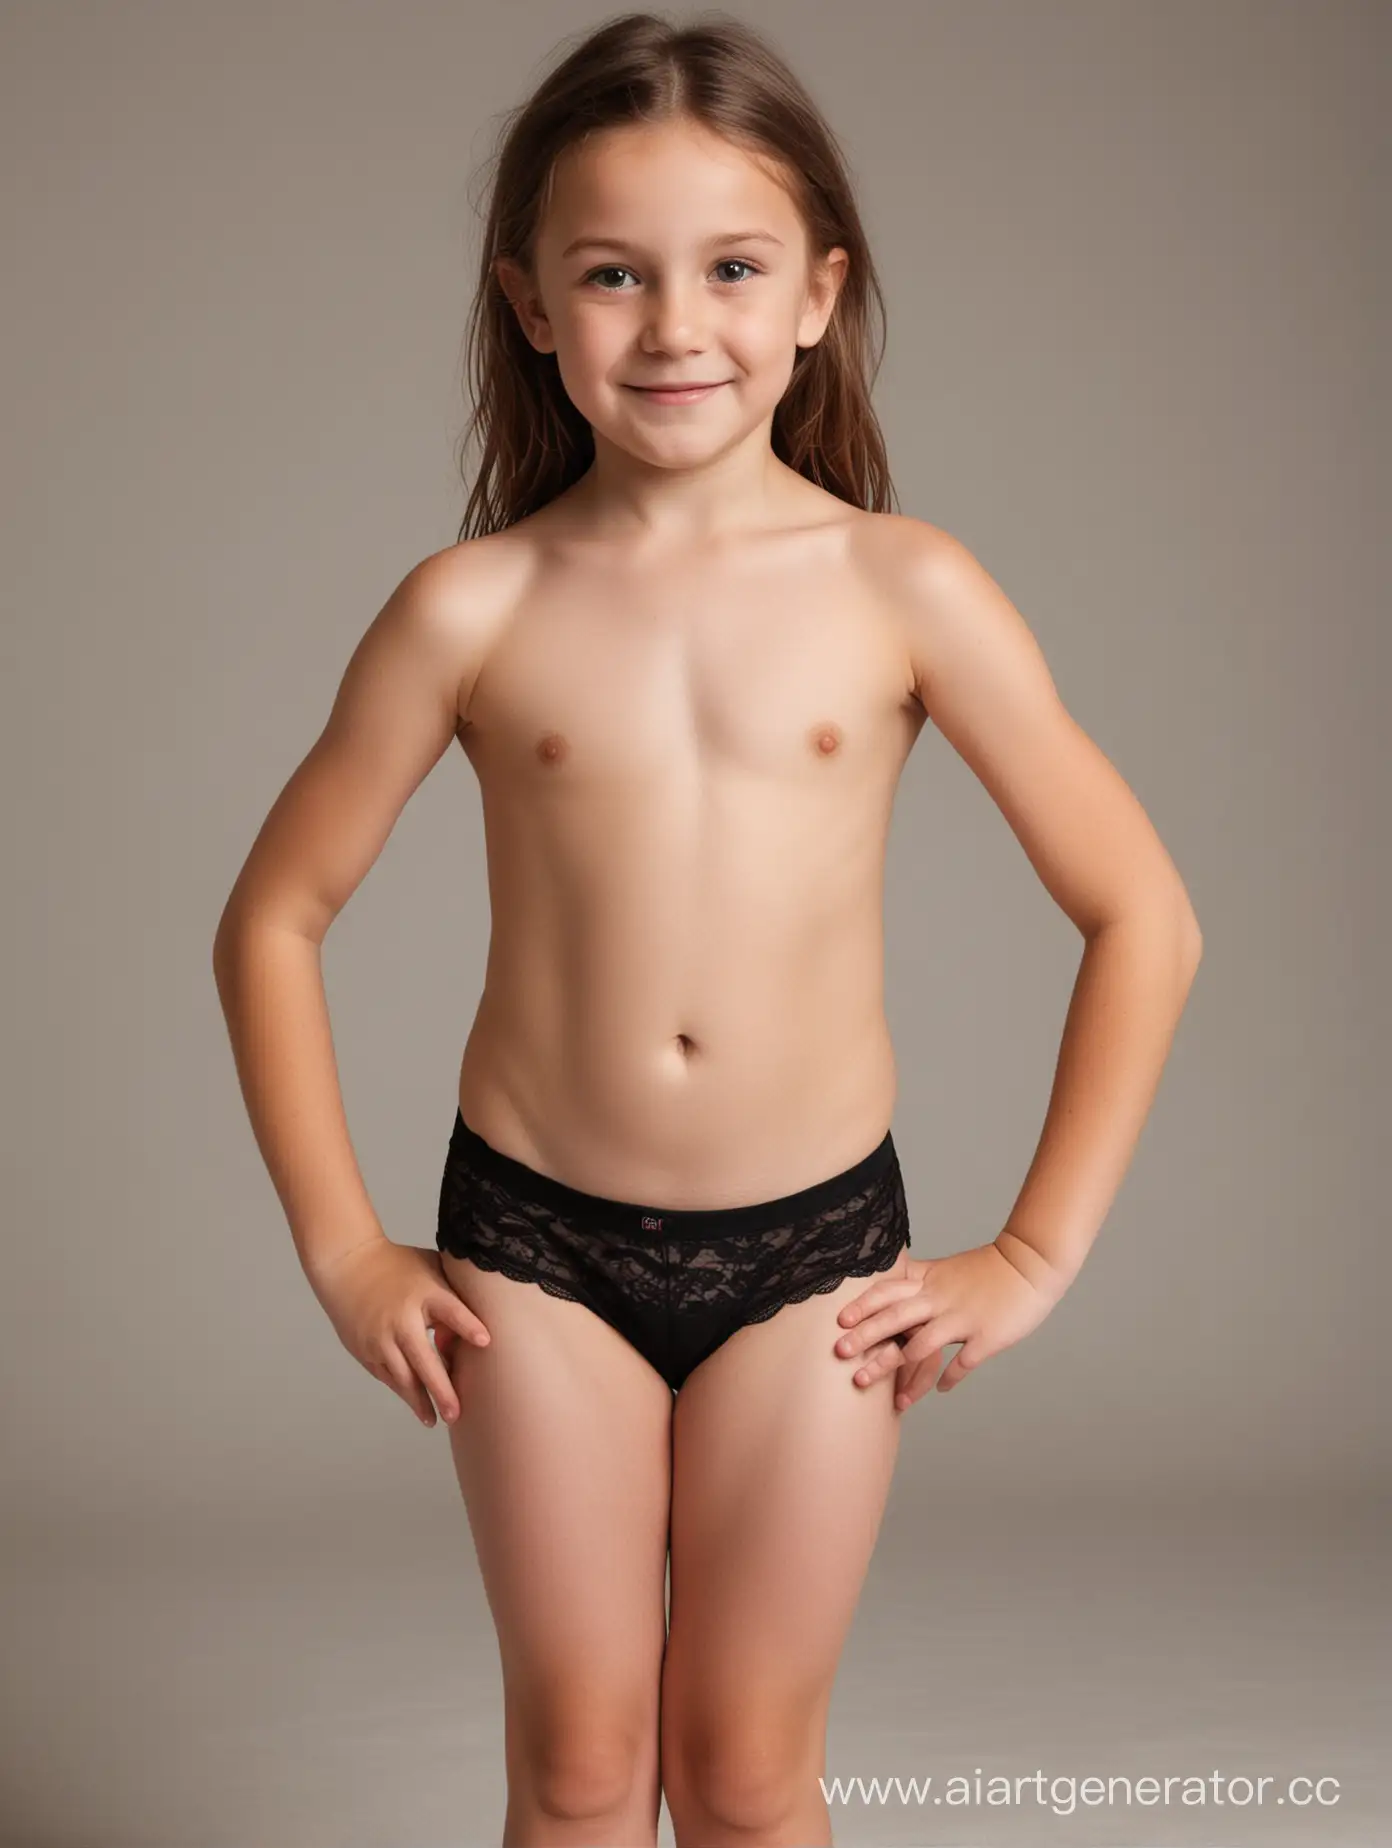 Young-Girl-Posing-in-Black-Underwear-for-Artistic-Portrait